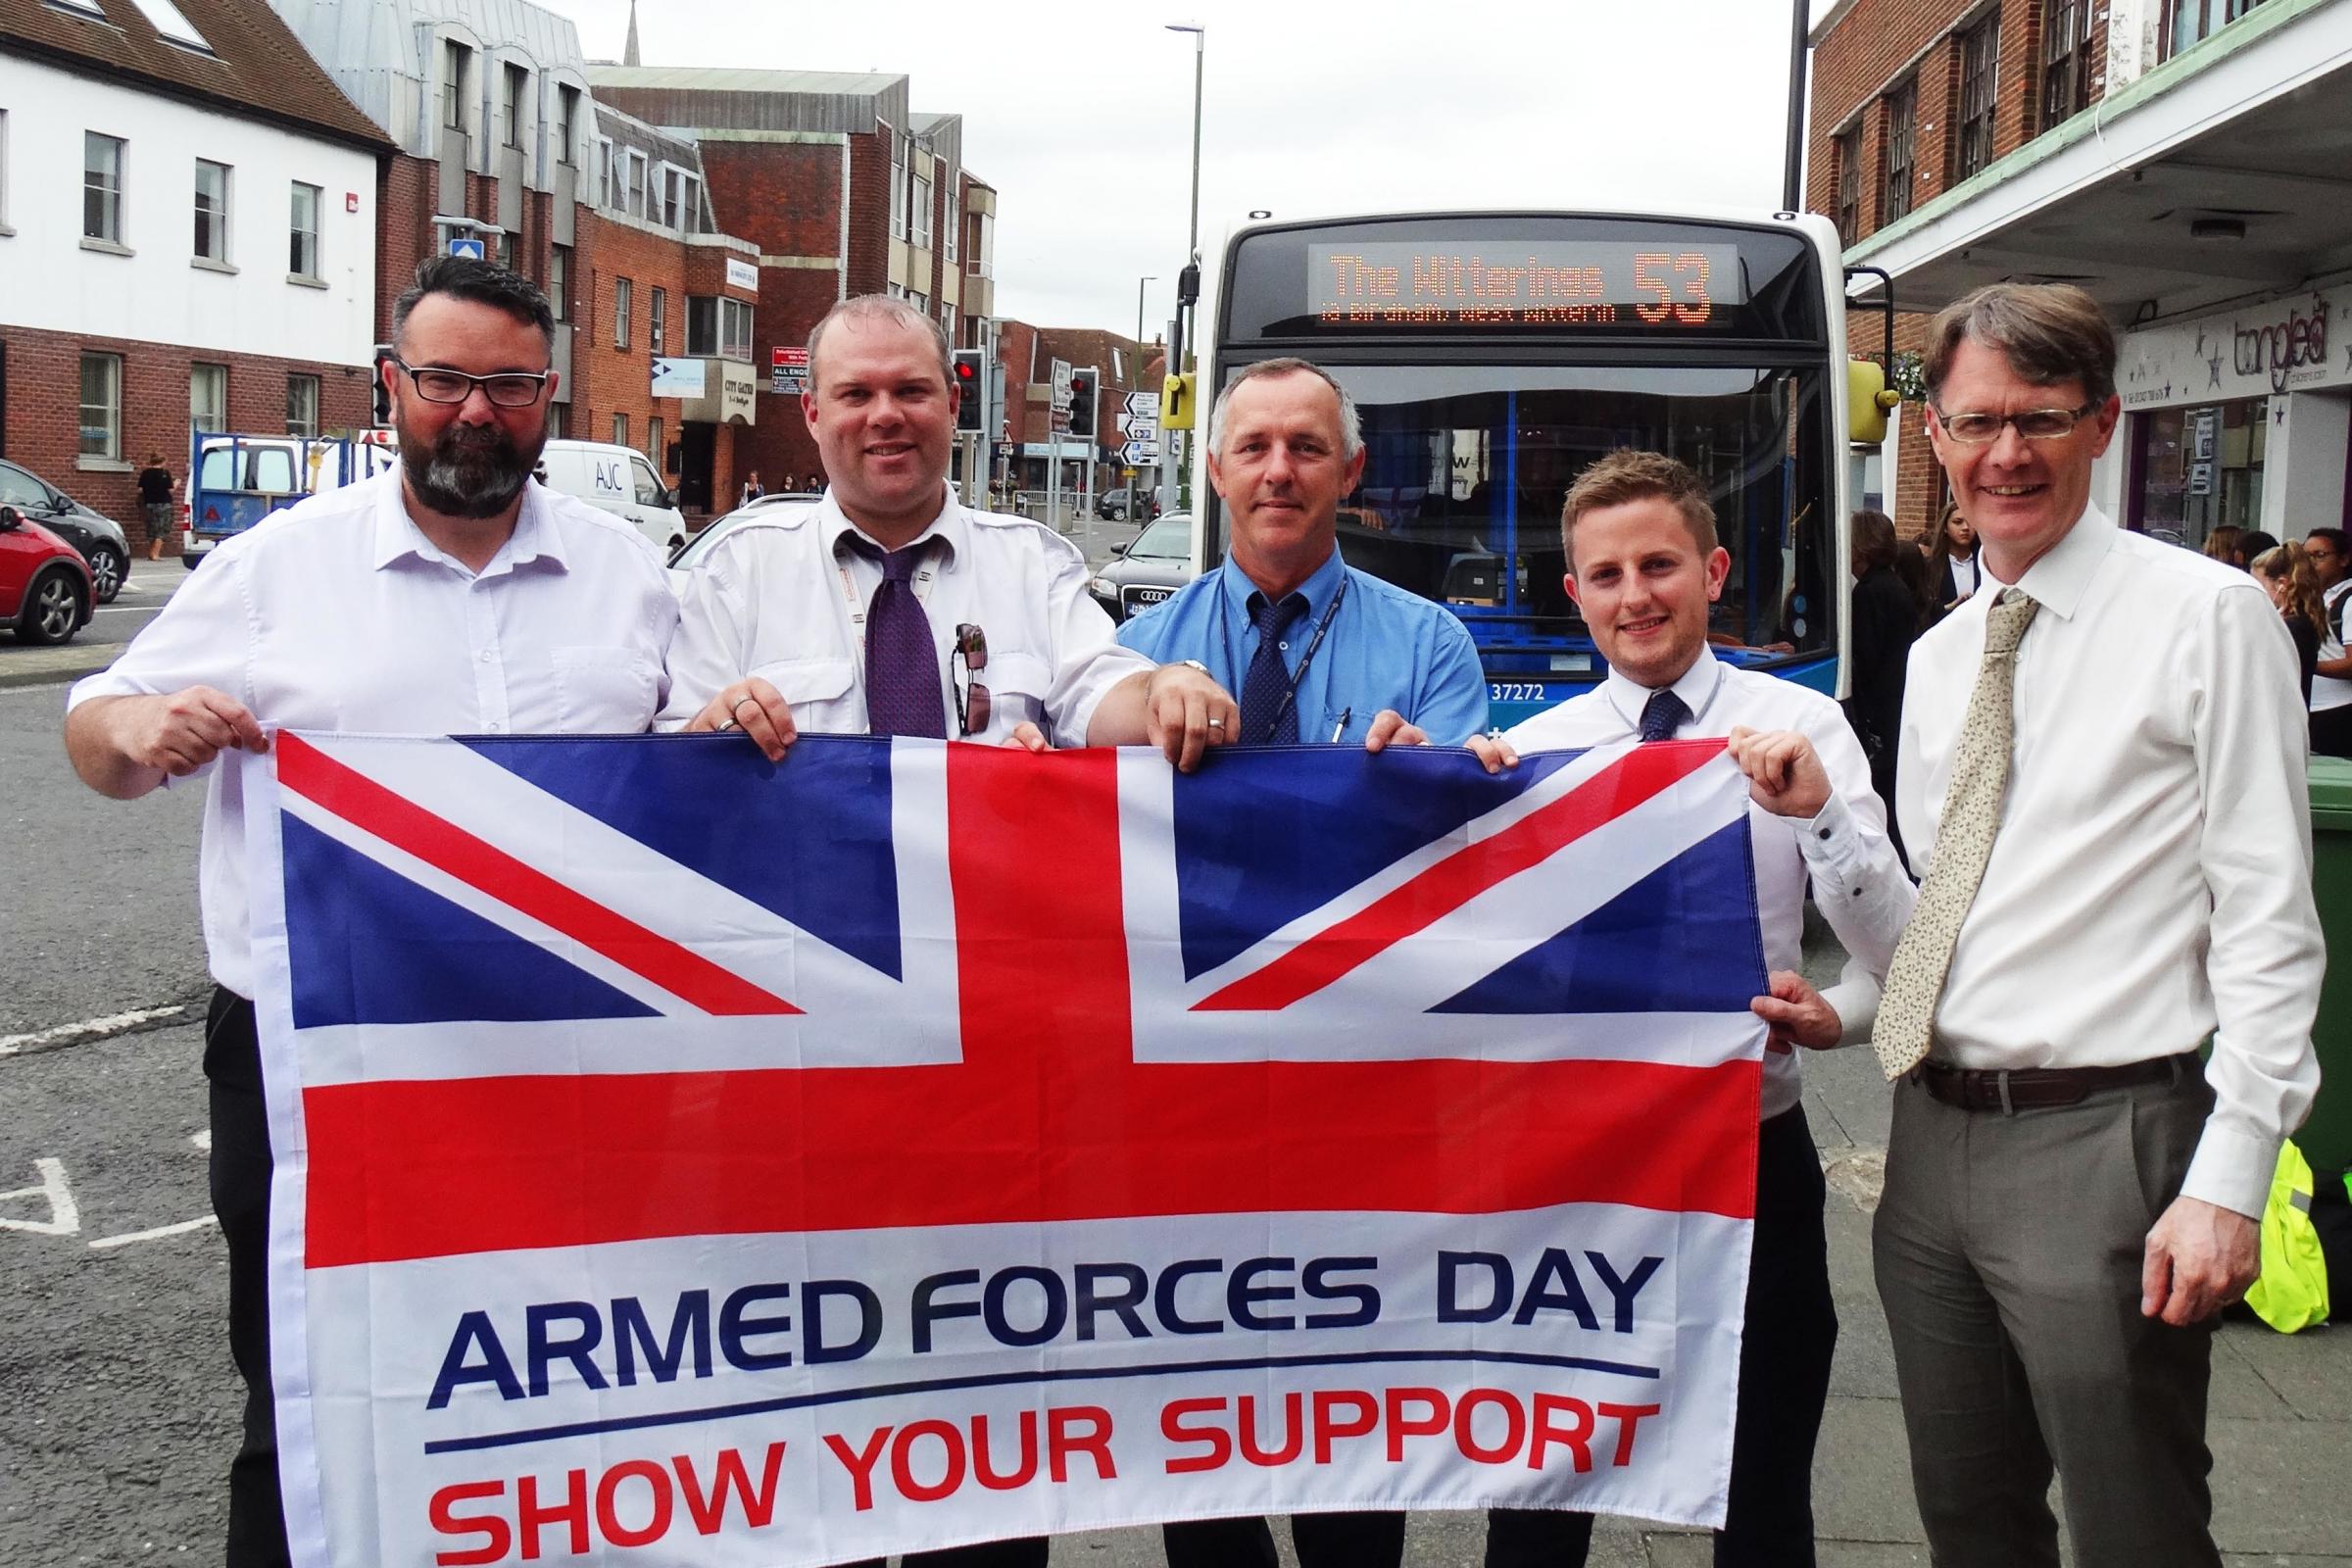 Military personnel to receive free travel from bus company on Armed Forces Day